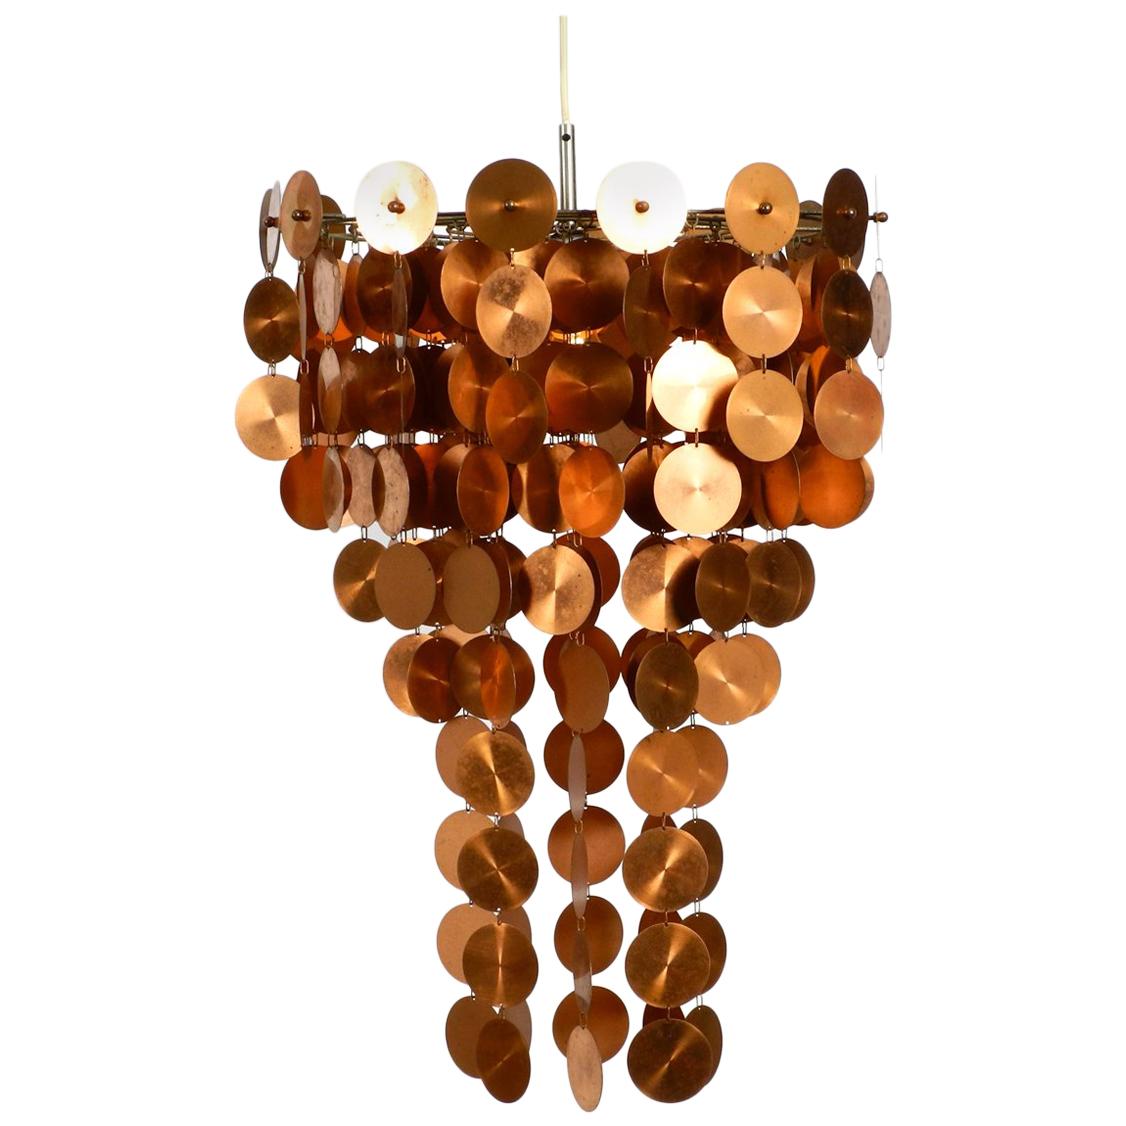 Stunning 1970s Pop Art Extra Large Lamp with Copper Discs Arranged as a Grape For Sale